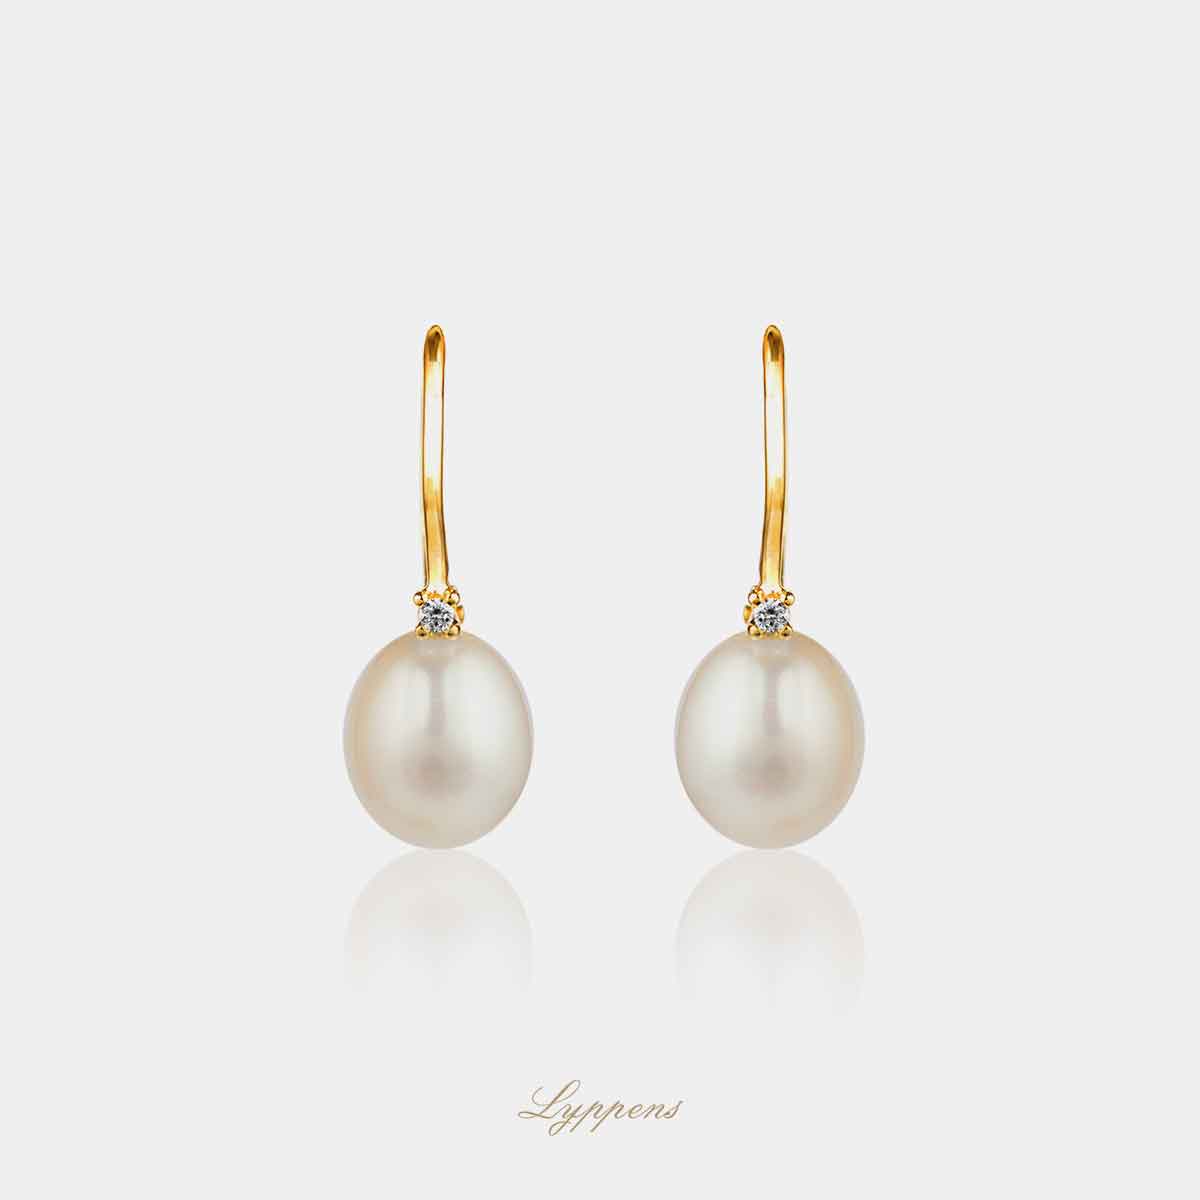 Yellow gold earrings with pearl and diamond